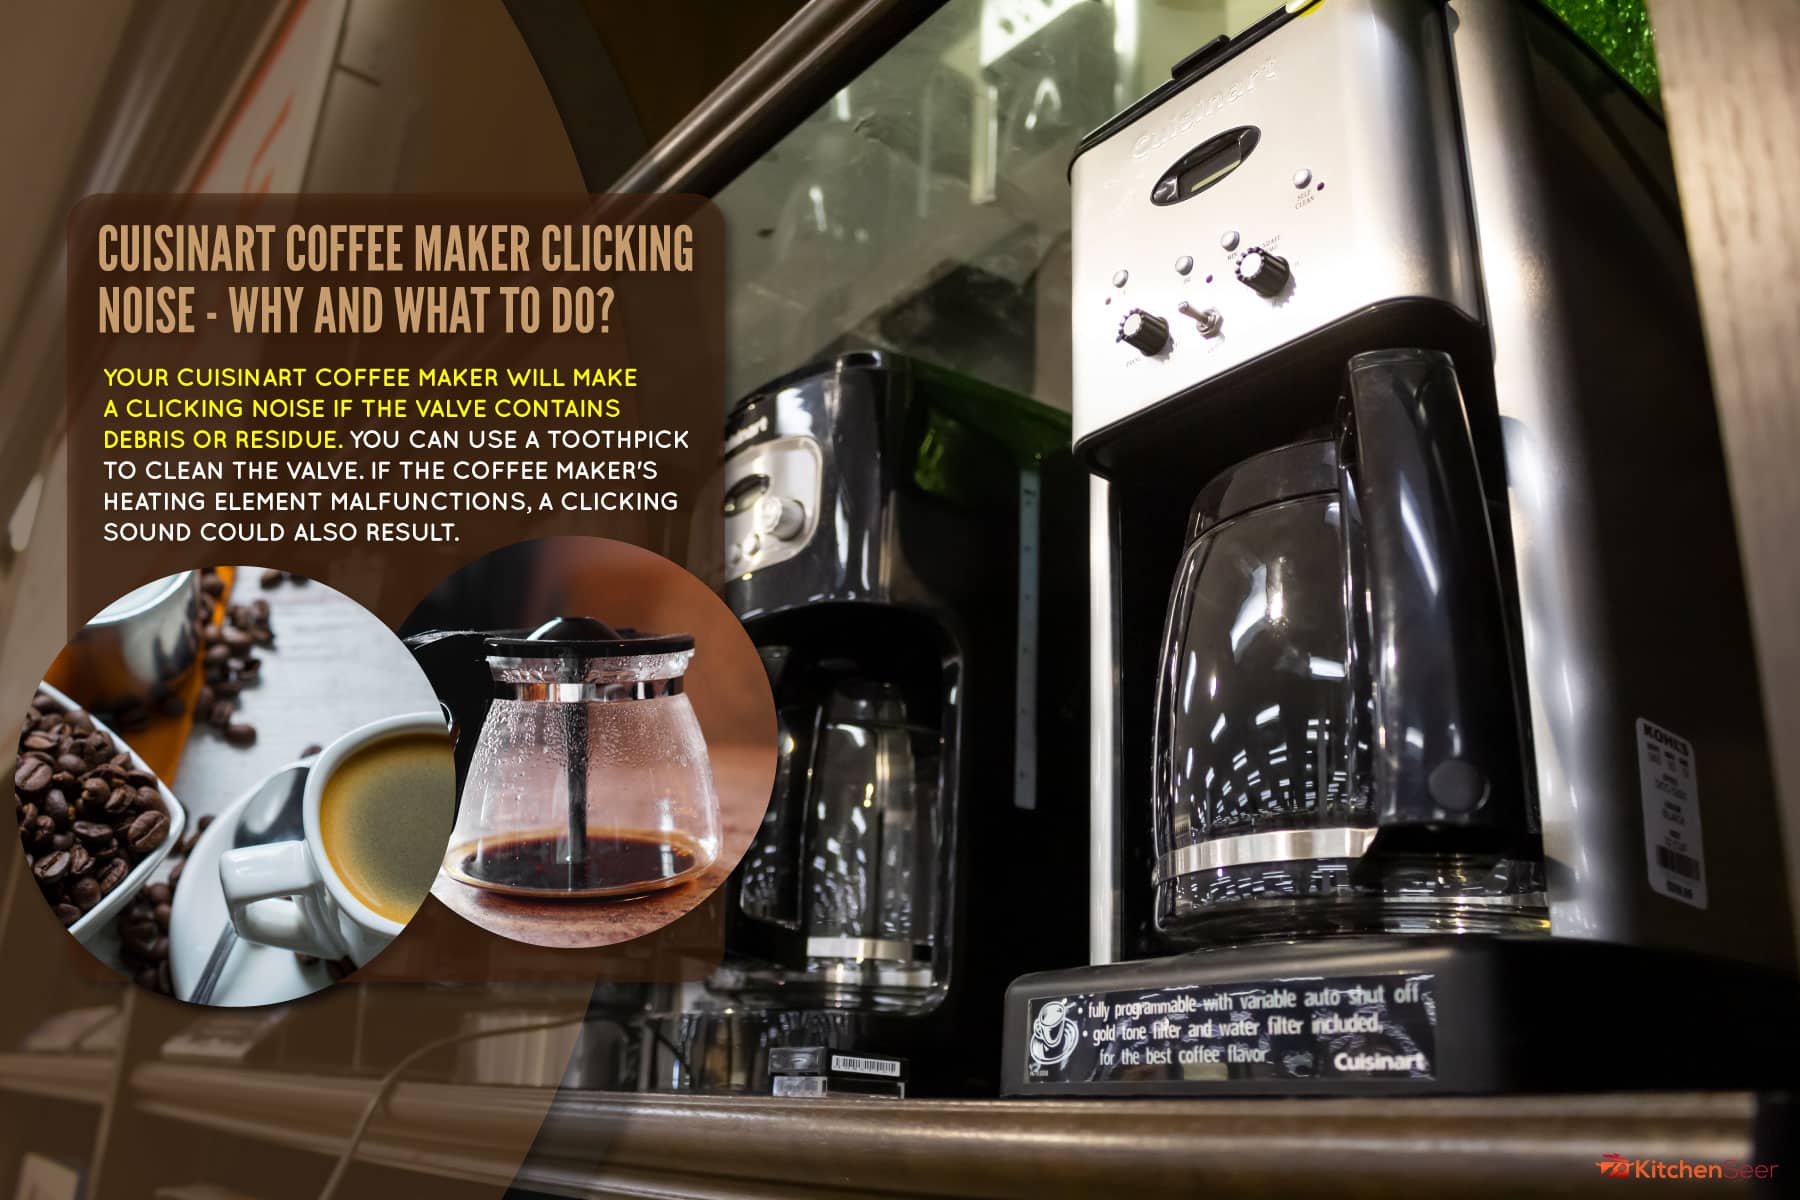 Cuisinart Coffee Maker brand new display on the shop, Cuisinart Coffee Maker Clicking Noise - Why And What To Do?